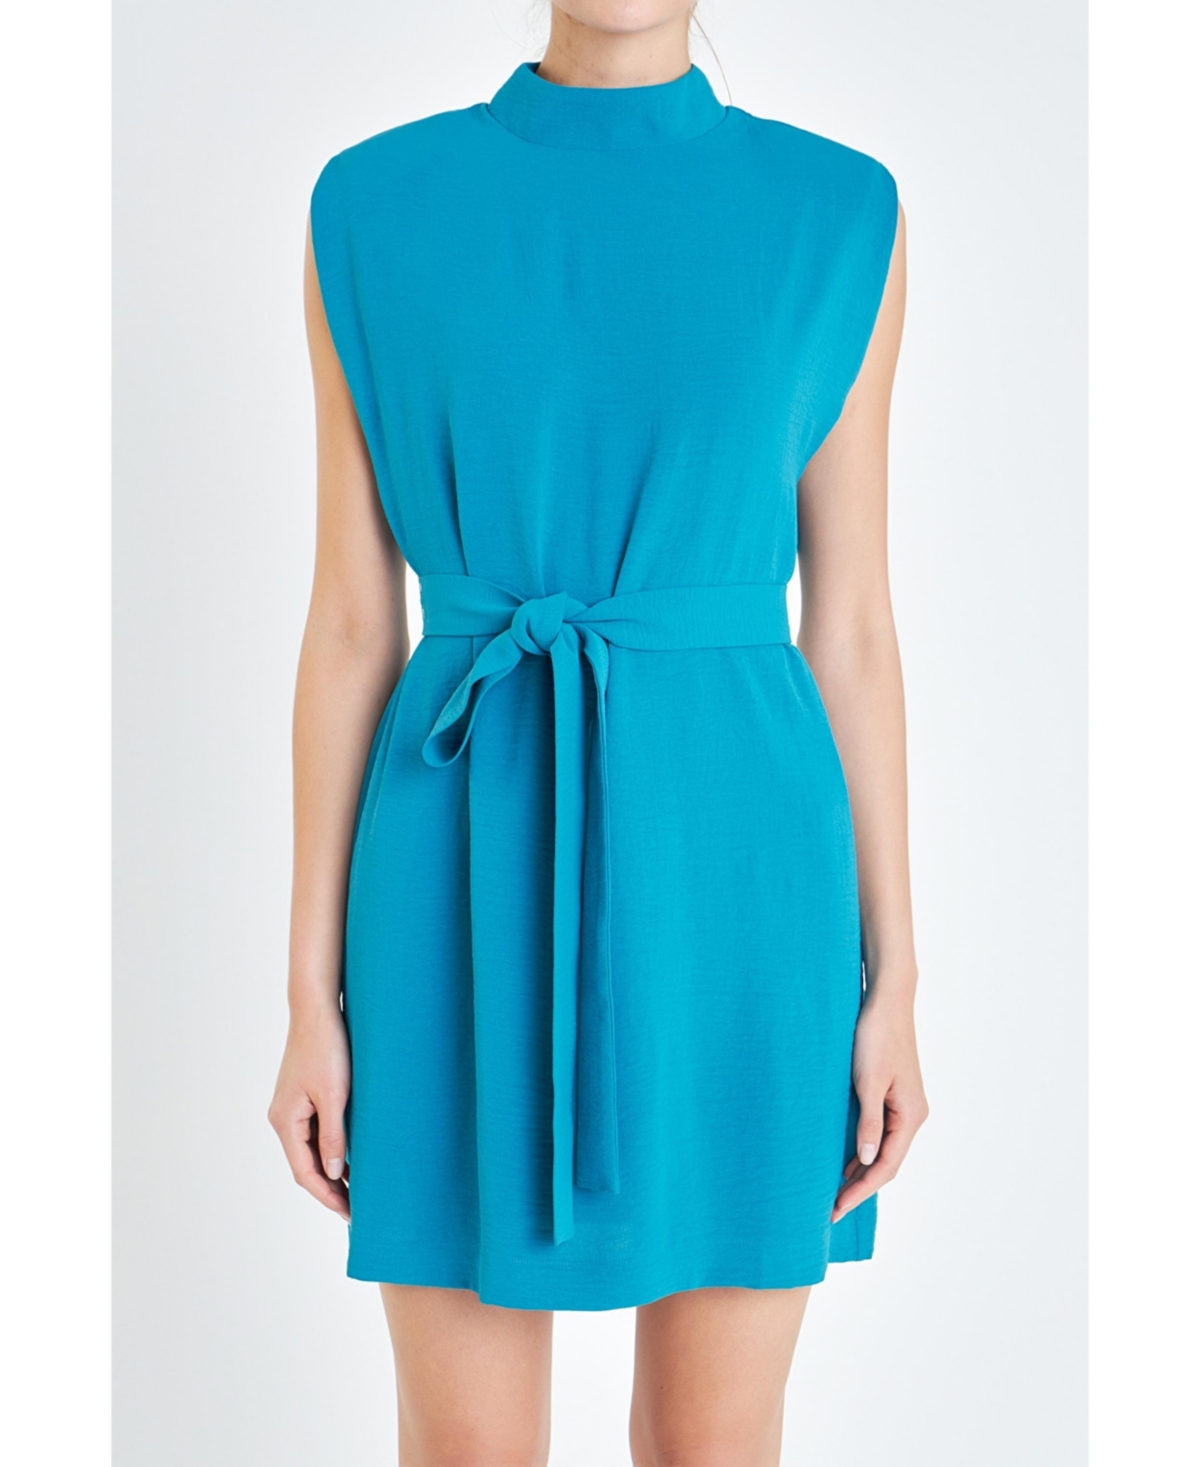 Women's Sleveless Shoulder Pad Shift Dress with Tie - Turquoise